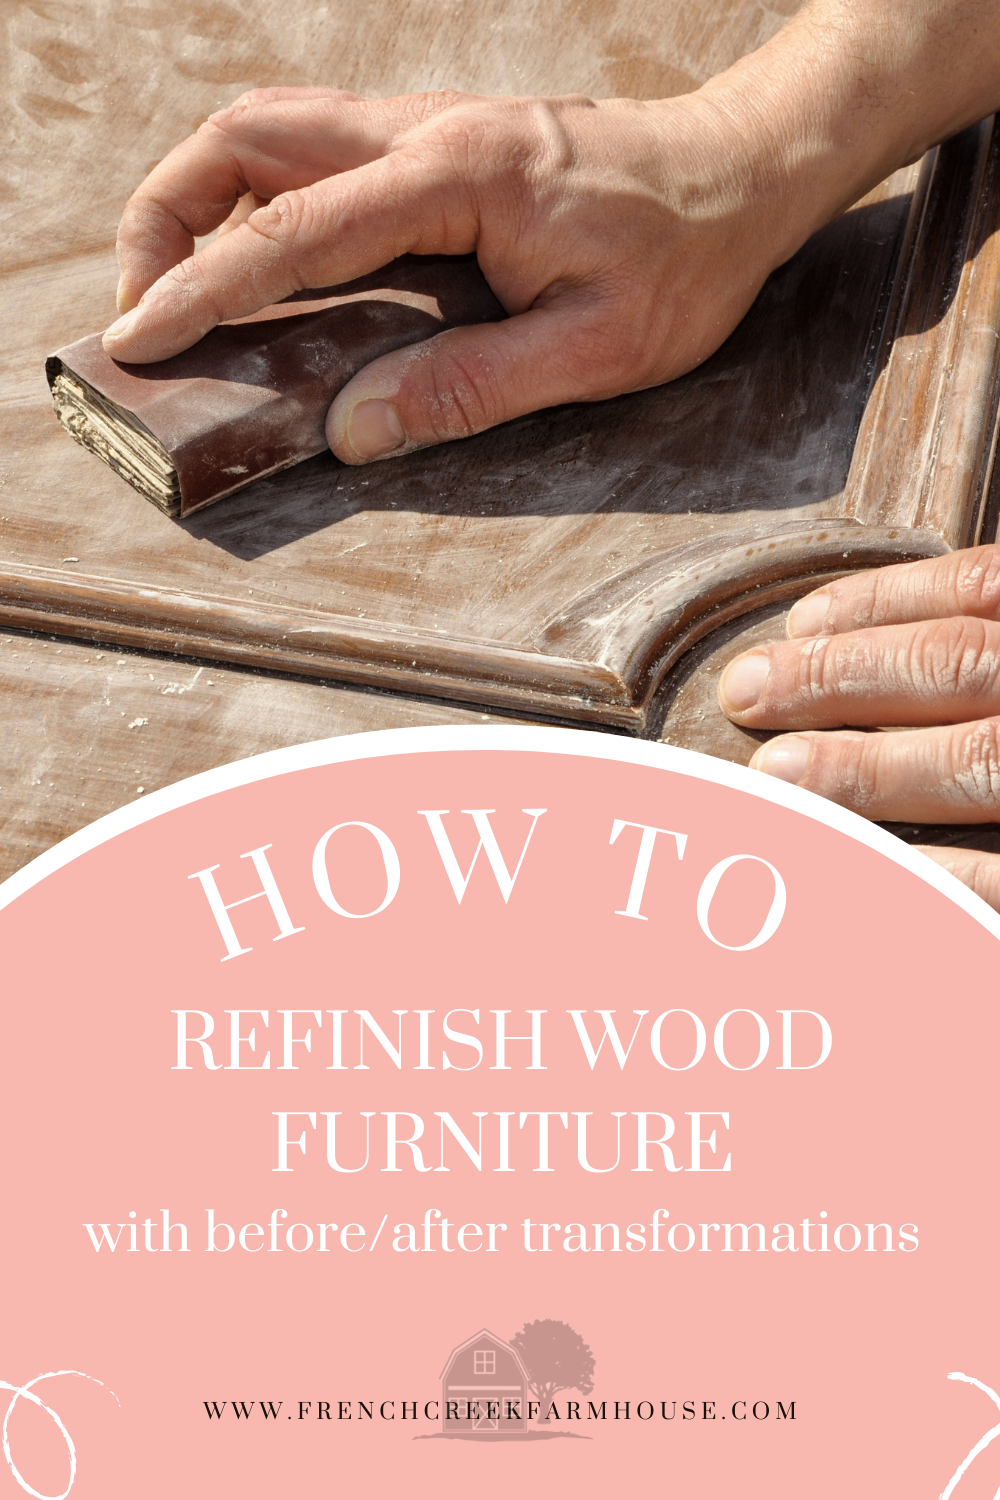 Learn how to refinish wood furniture with this step-by-step guide, including a photo collection of before-and-after inspiration!